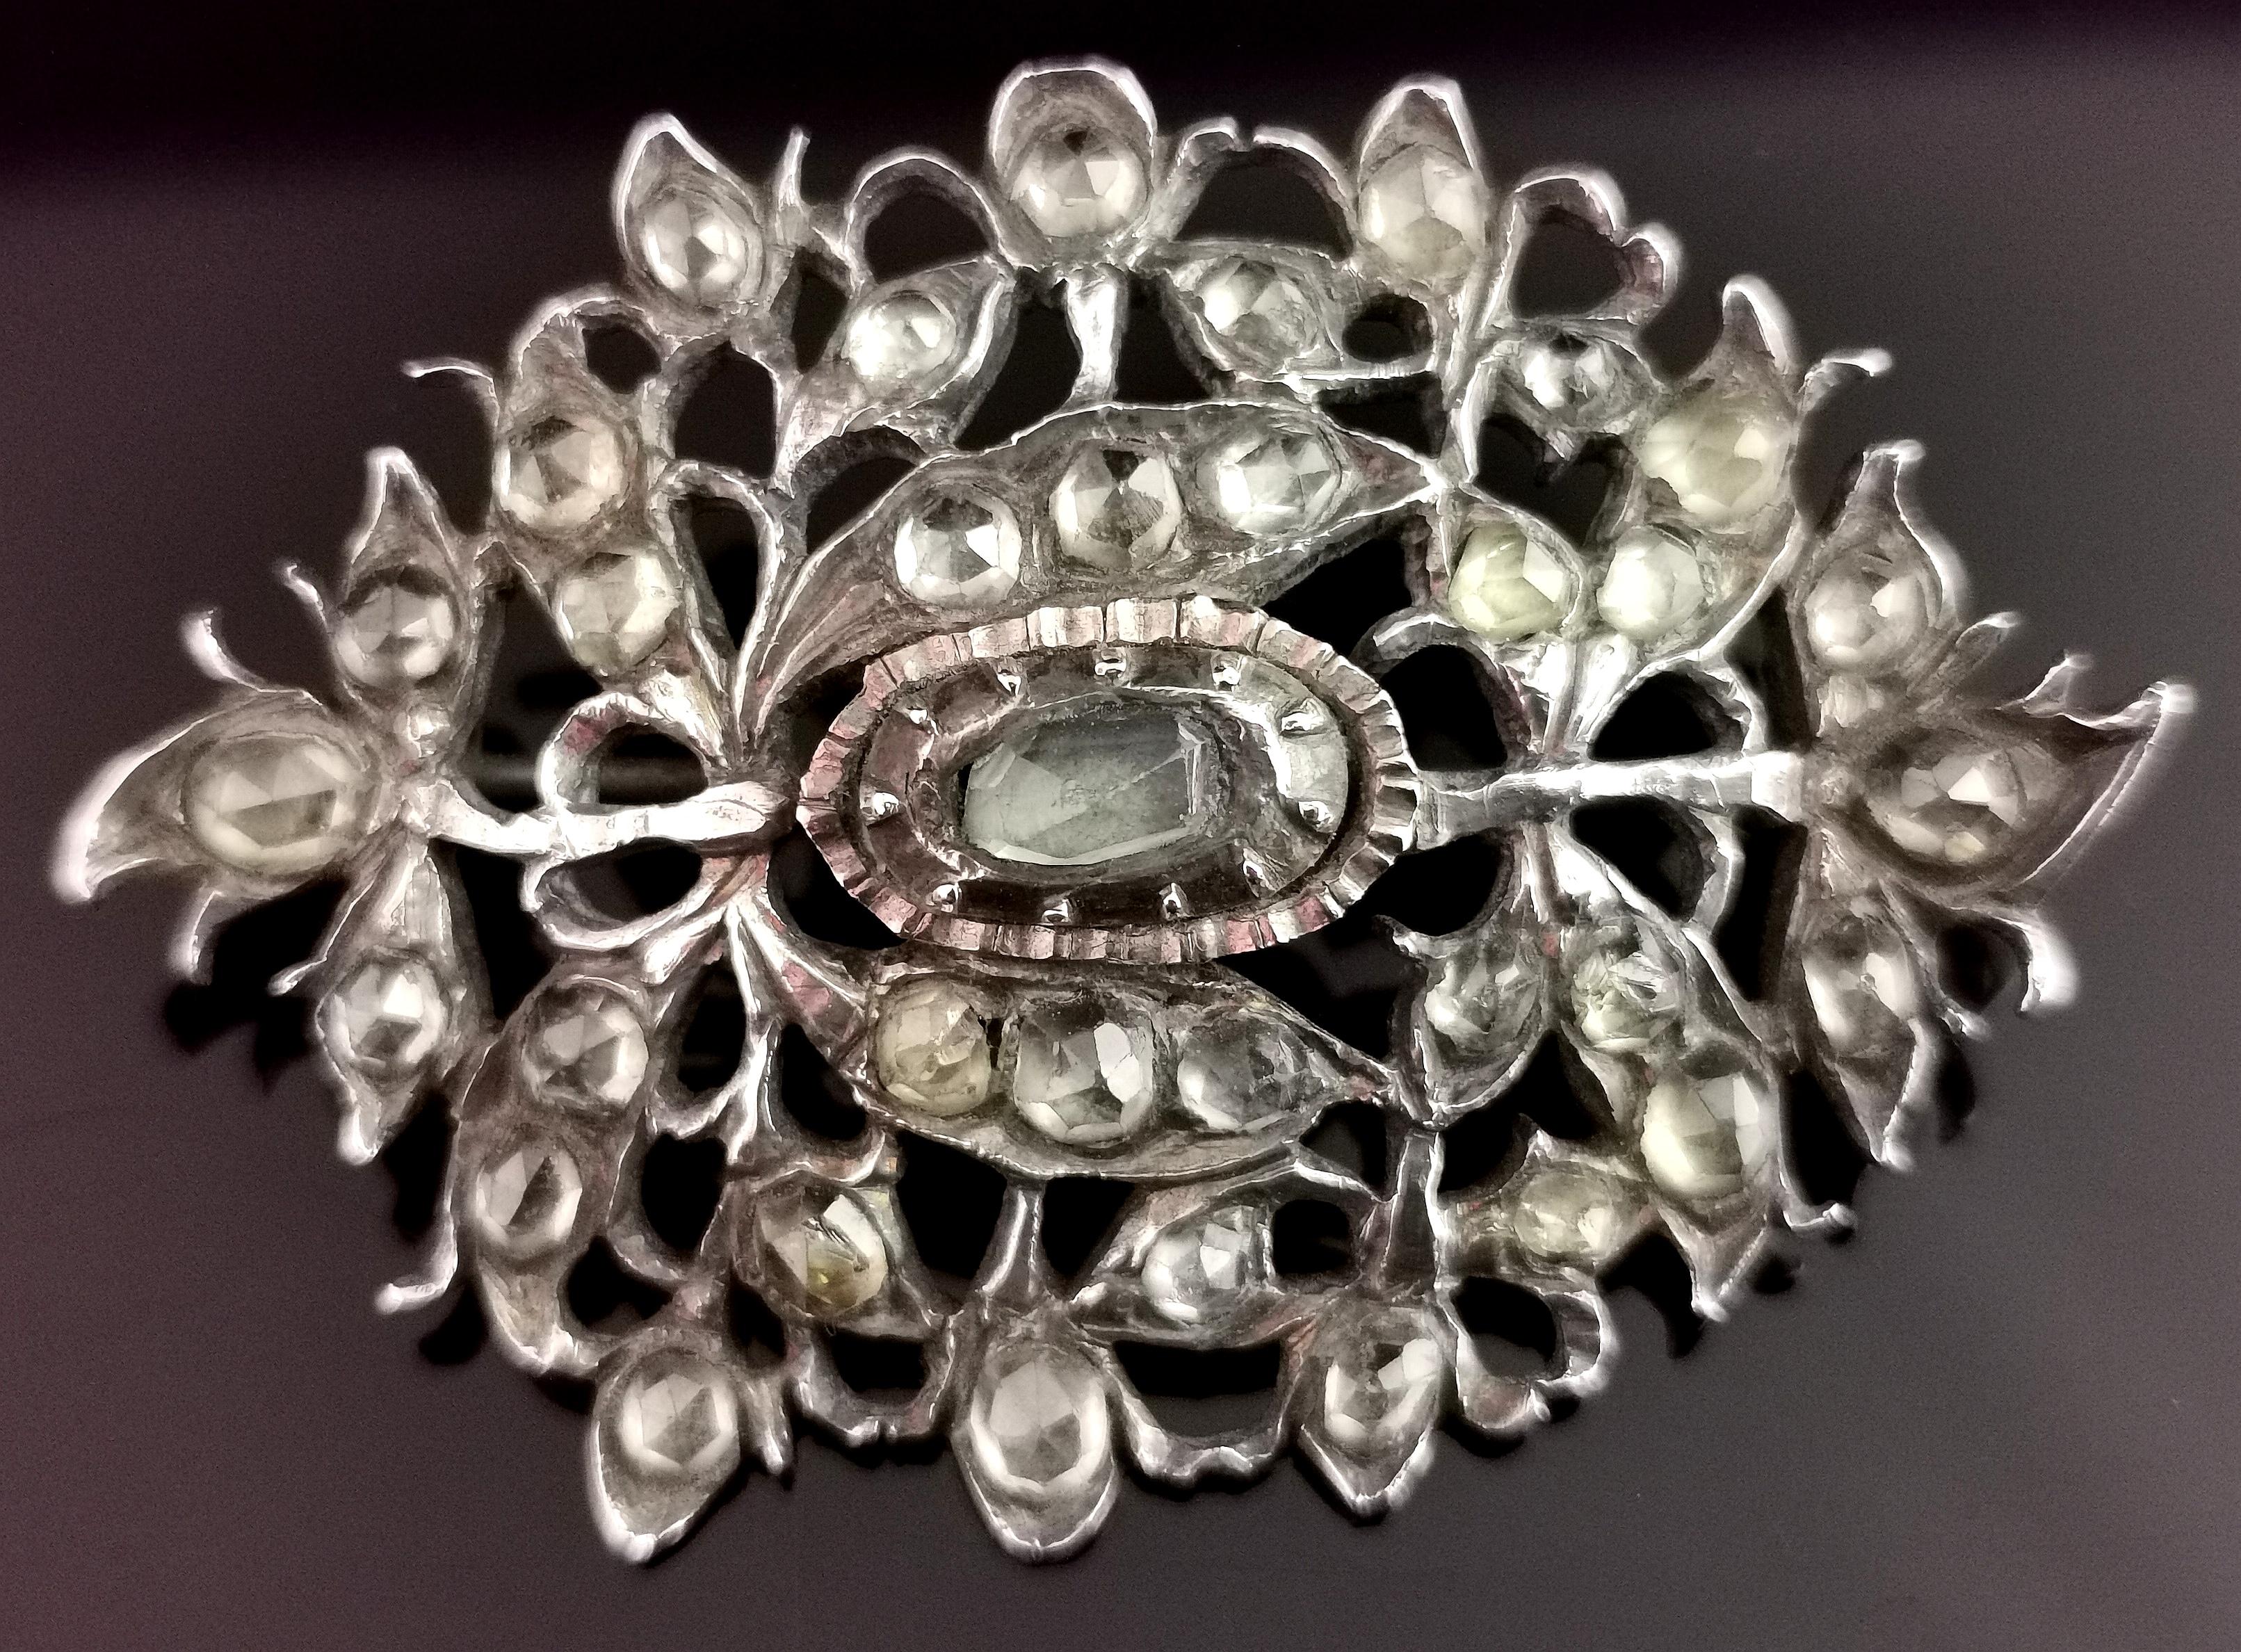 A beautiful antique Georgian floral spray brooch.

It is a large sized piece, suitable for securing a cloak or large shawl.

It has a floral openwork design with elements of the Iberian style and the early Giardinetti pieces, crafted in 800 silver